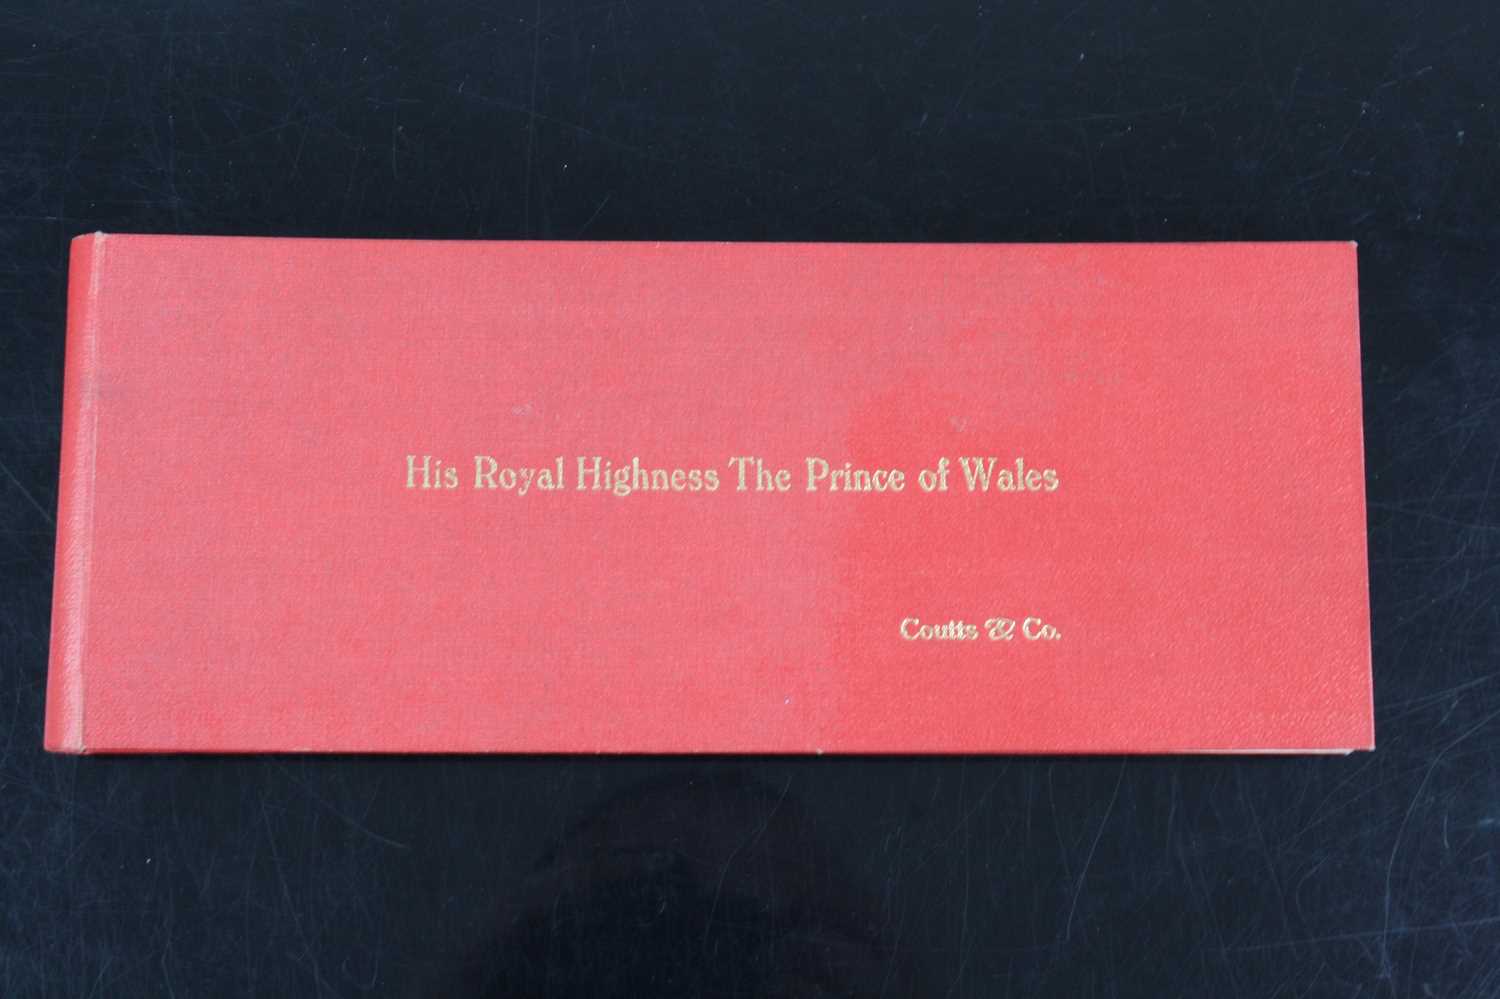 A 20th century Coutts & Co. cheque book, the covers in red cloth with gilt tooled title "His Royal